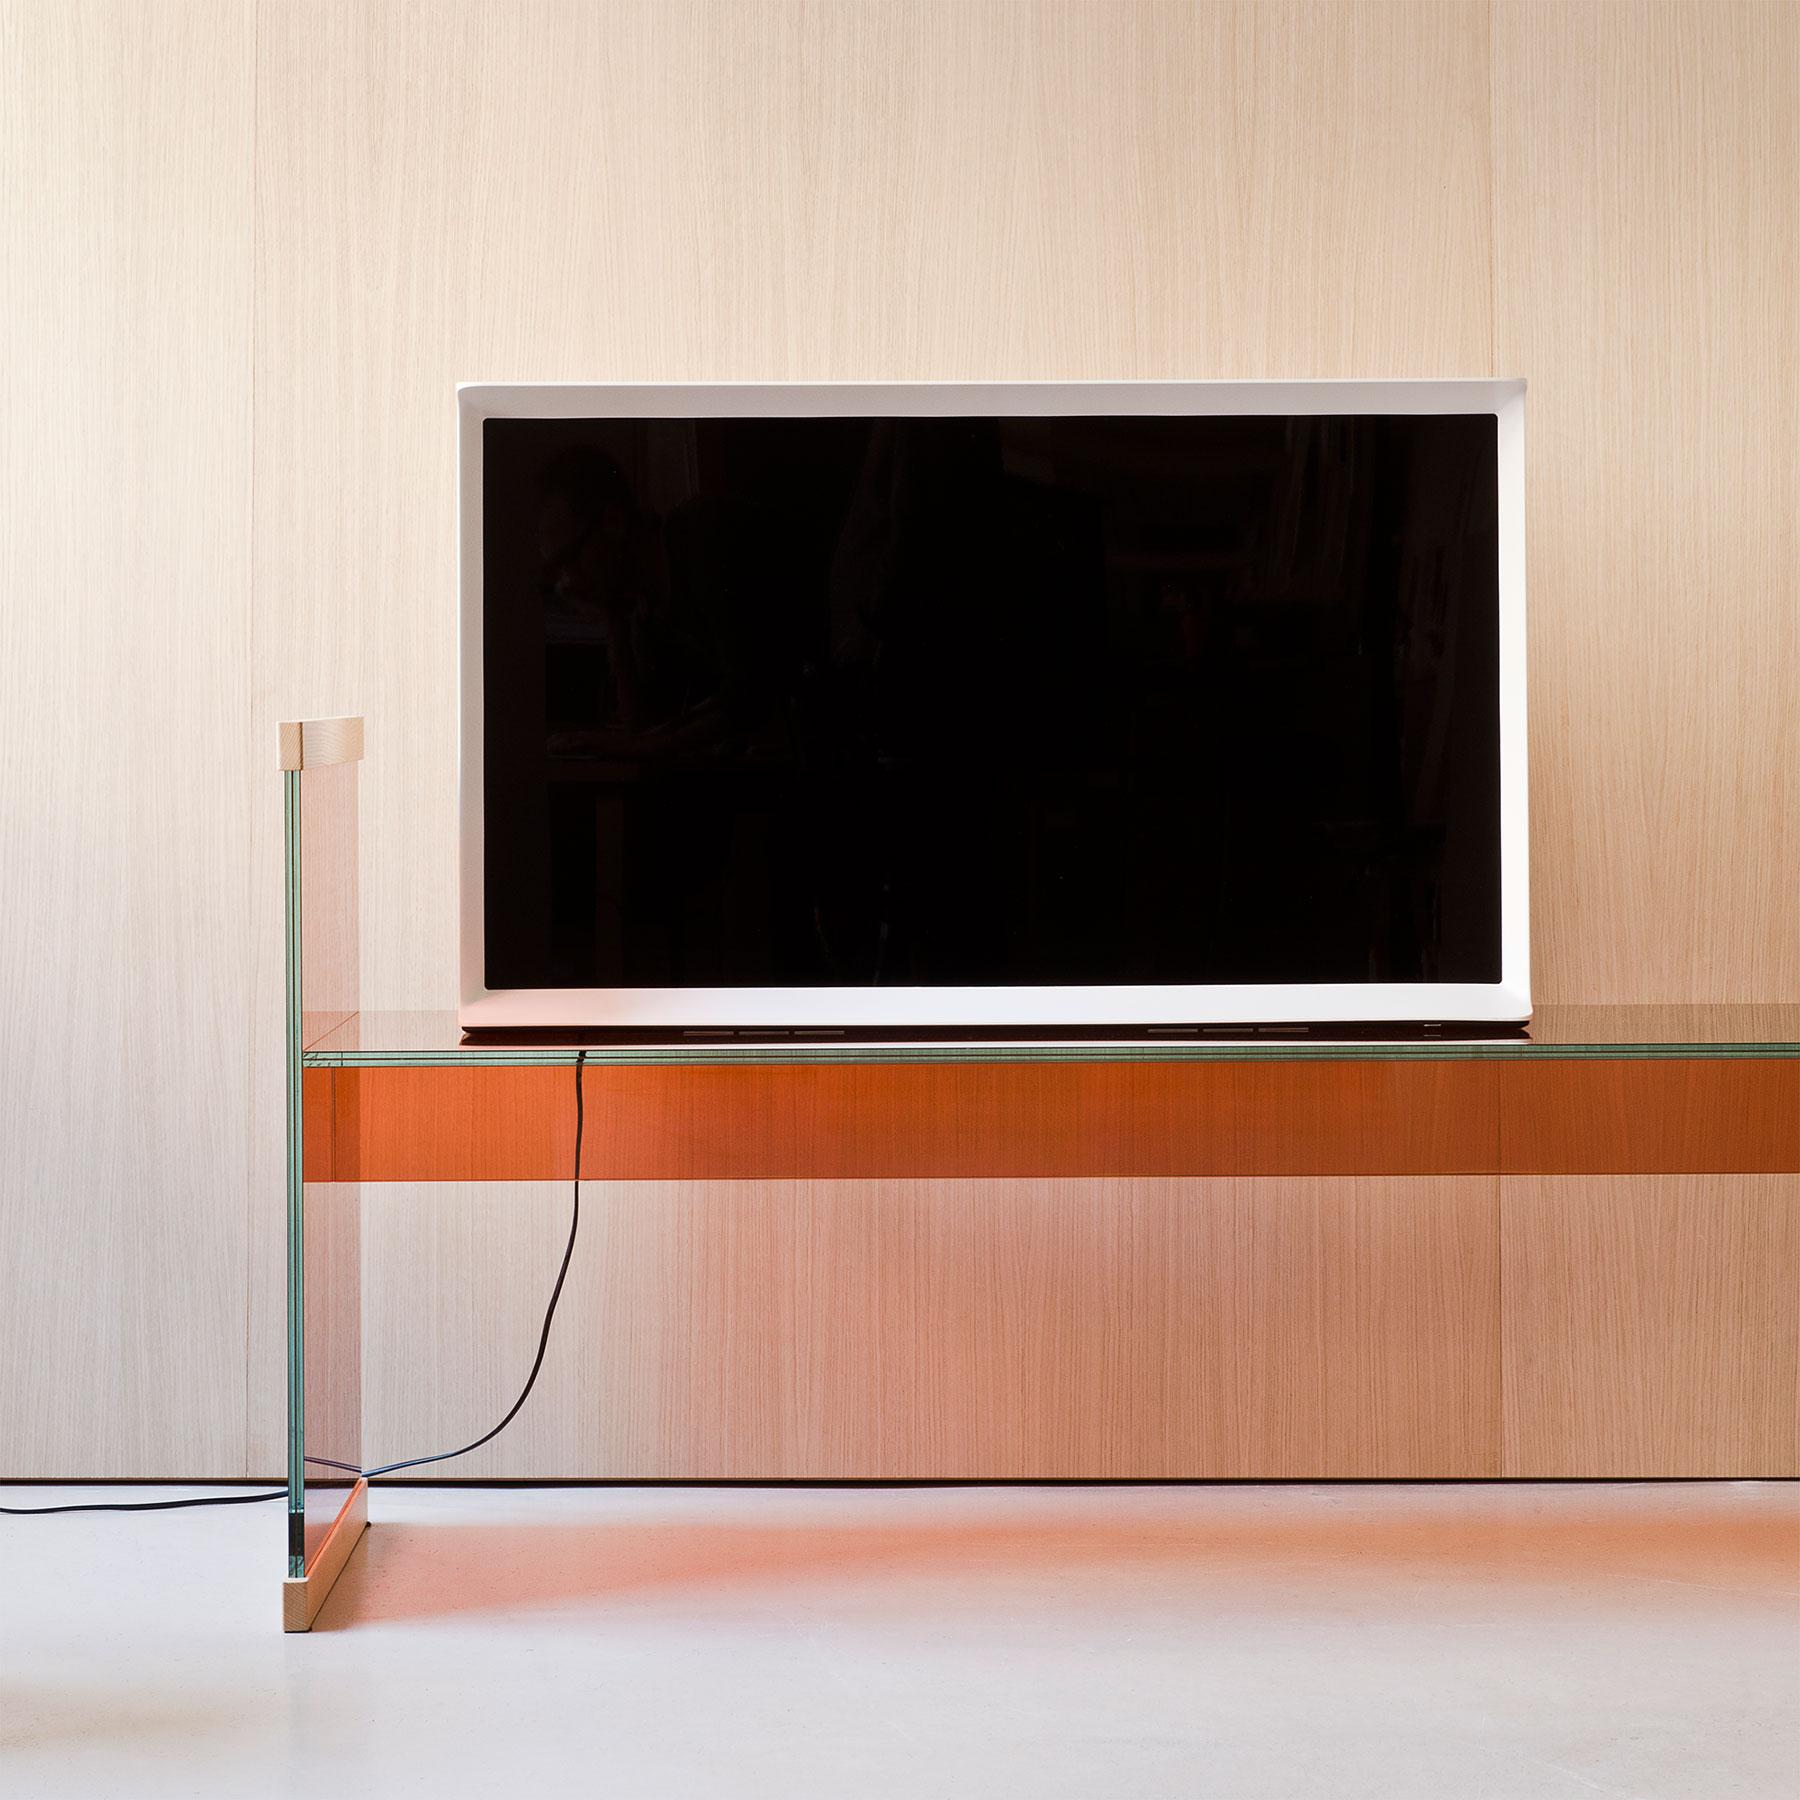 Samsung's Serif TV is available in the US - SlashGear